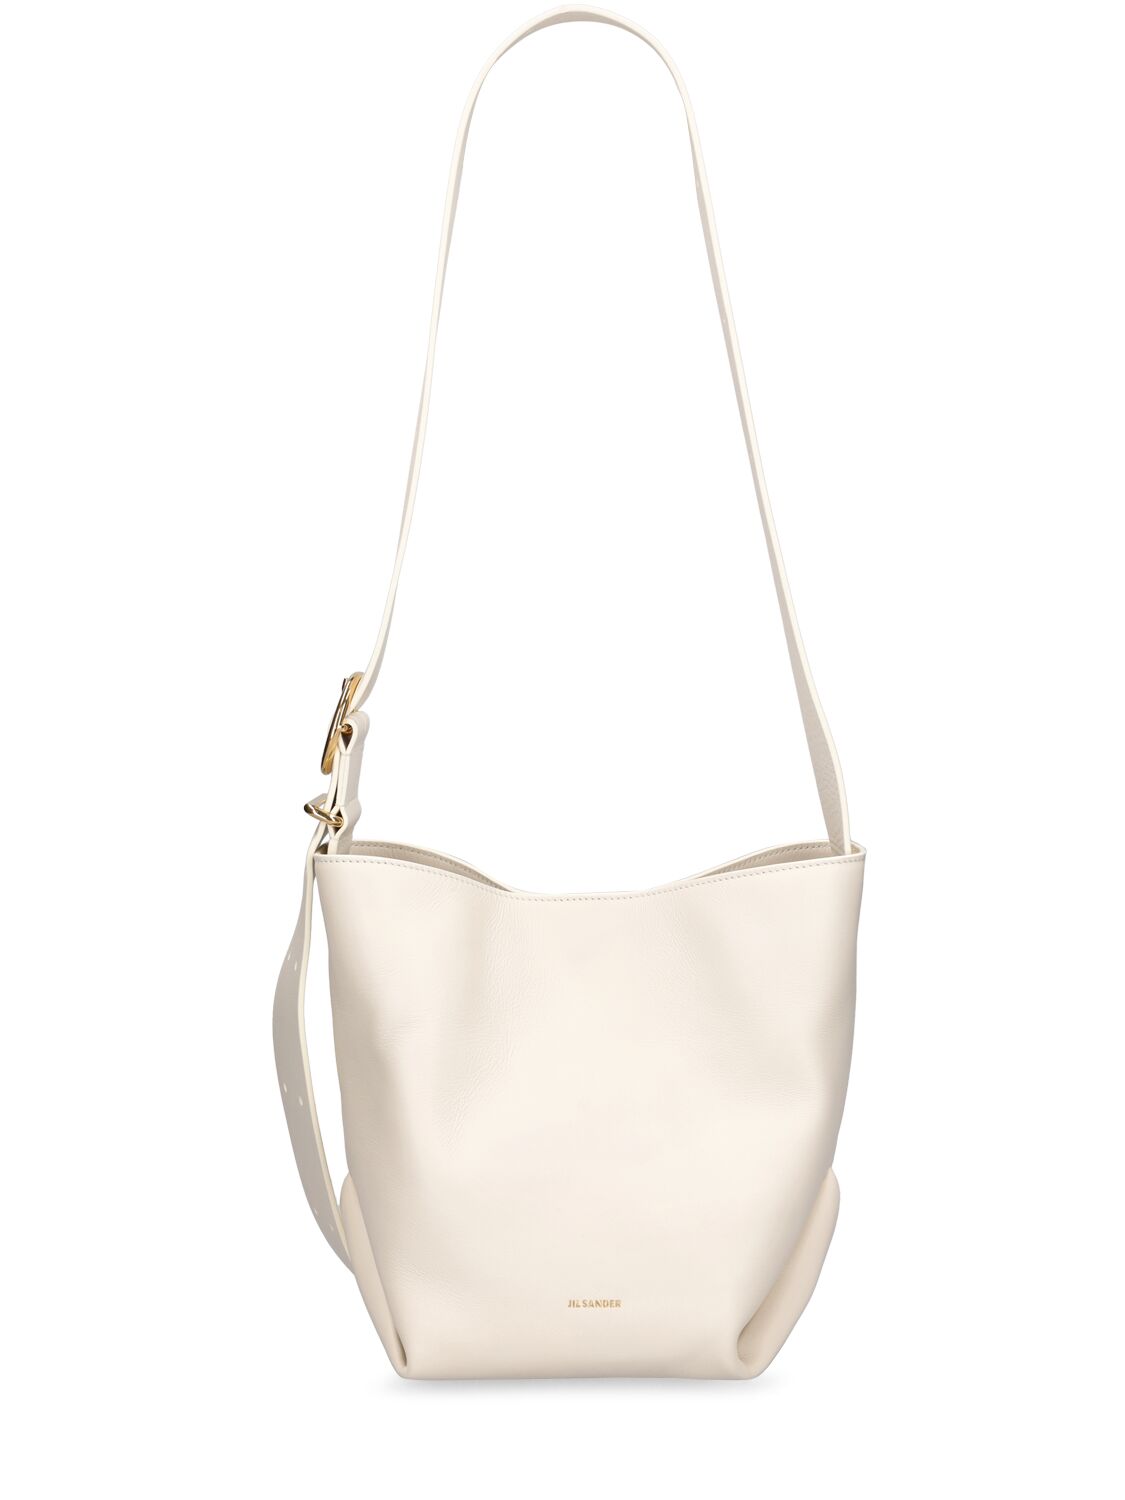 Jil Sander Small Folded Leather Tote Bag In Eggshell